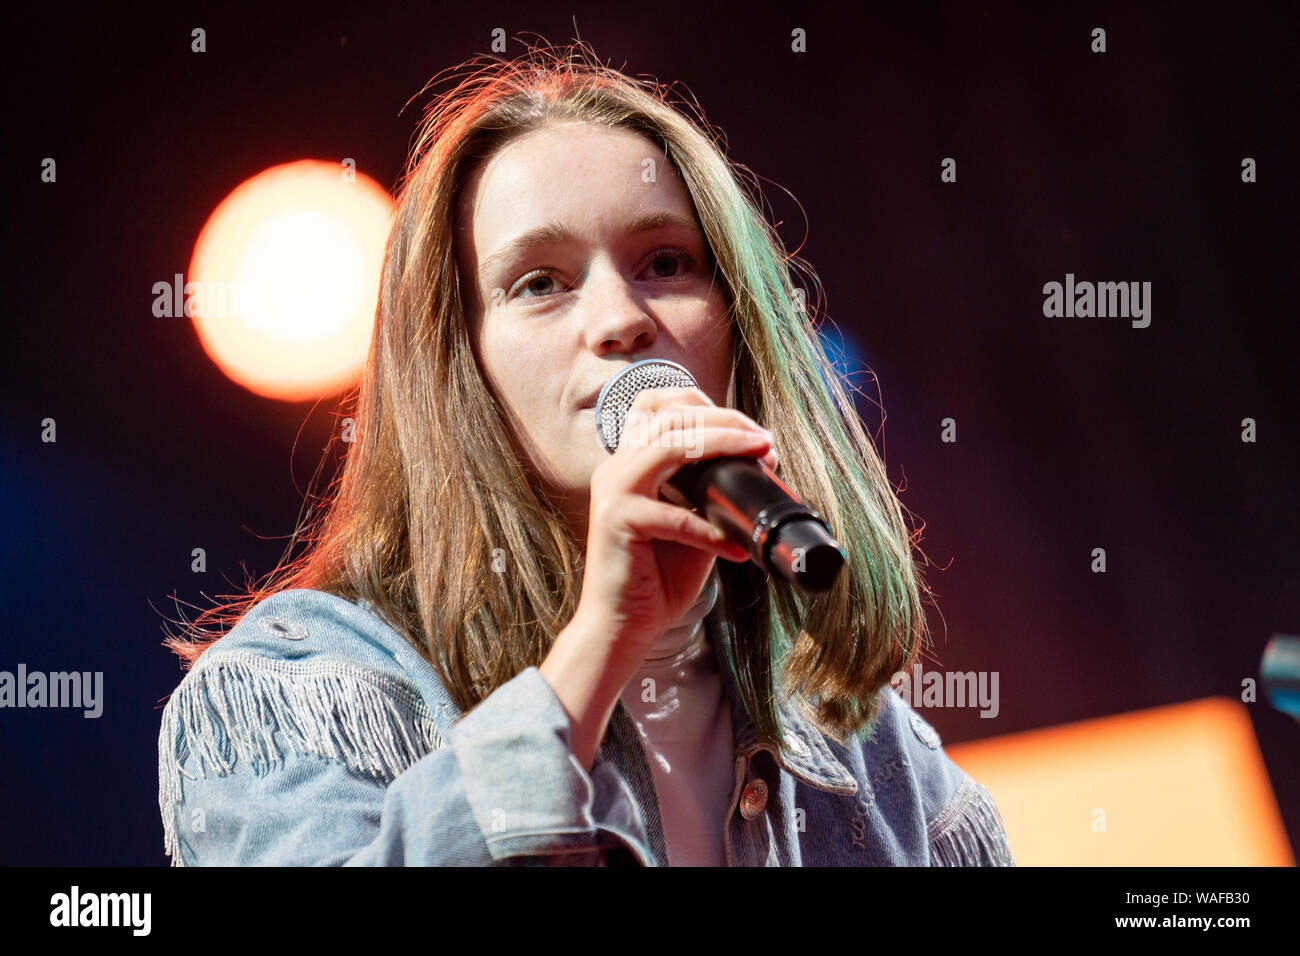 Bergen, Norway. 16th, August 2019. The Norwegian singer and songwriter Sigrid performs a live concert at Plenen in Bergen. (Photo credit: Gonzales Photo - Jarle H. Moe). Stock Photo